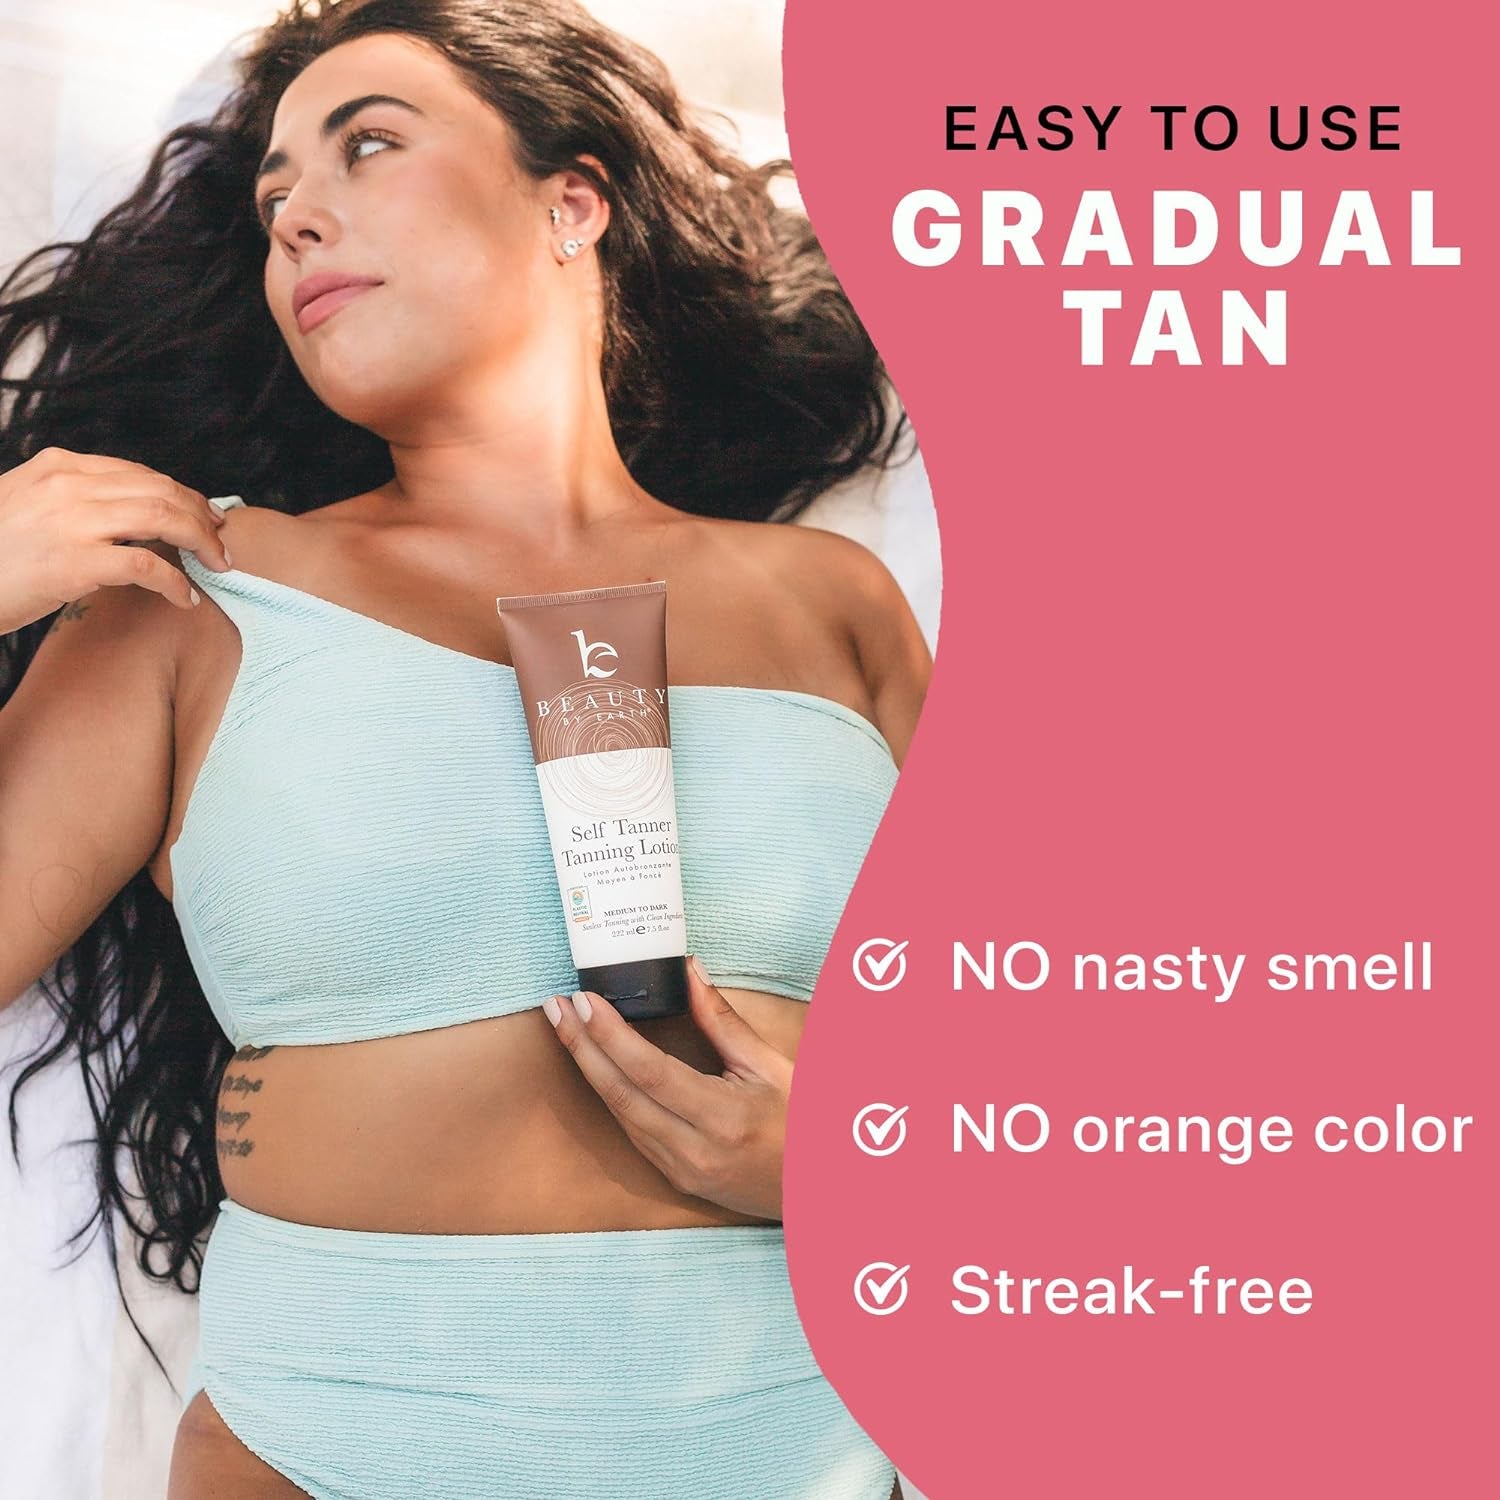 Self Tanner - USA Made with Natural & Organic Ingredients, Moisturizing Self Tanning Lotion with Aloe Vera & Coconut for a Natural Glow, Streak-Free Fake Tan, Medium to Dark